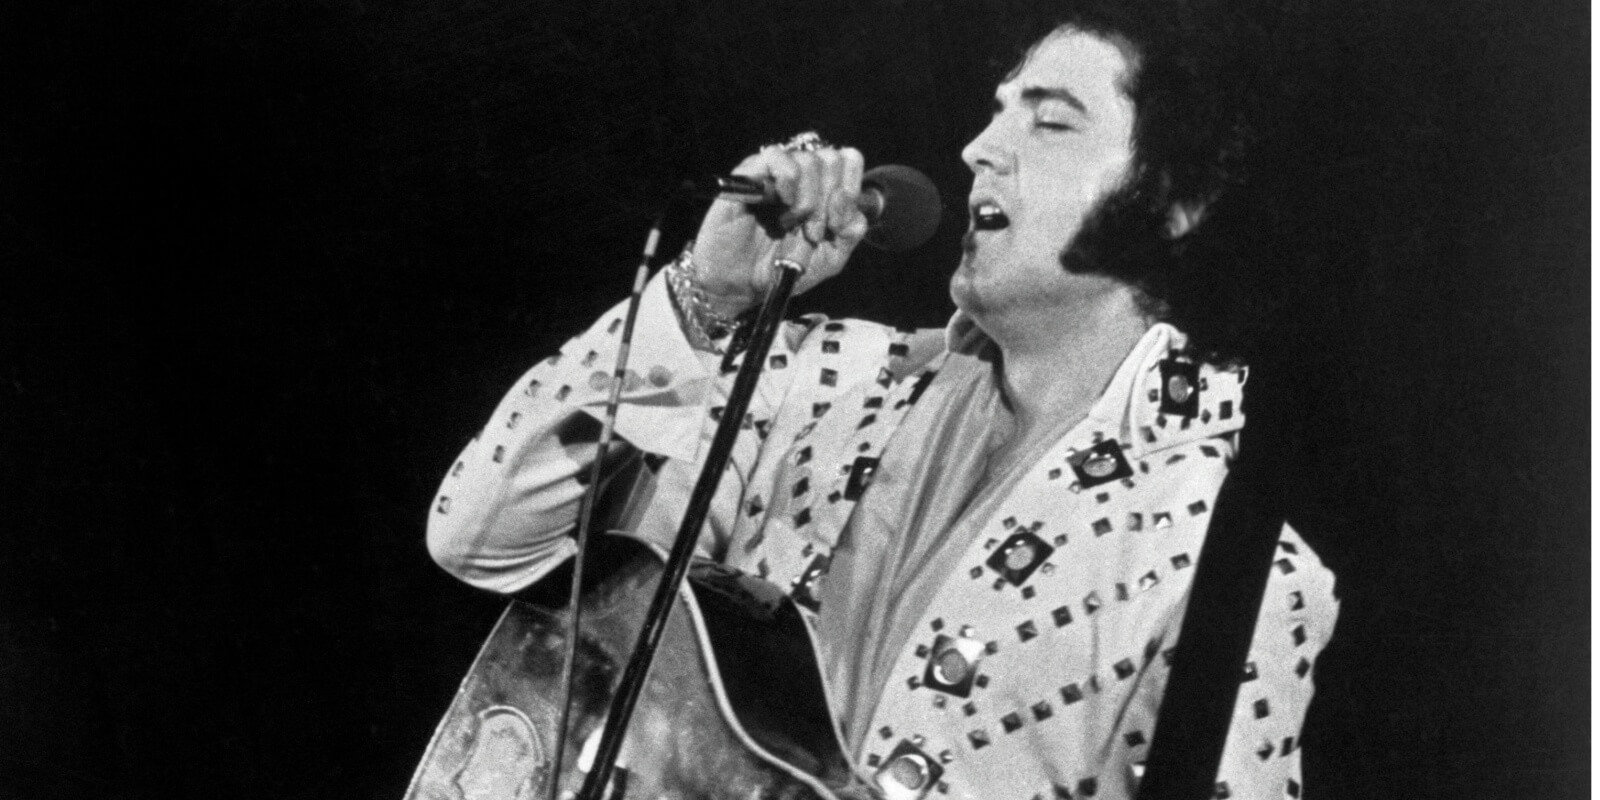 Elvis Presley performs on stage in the early 1970s.